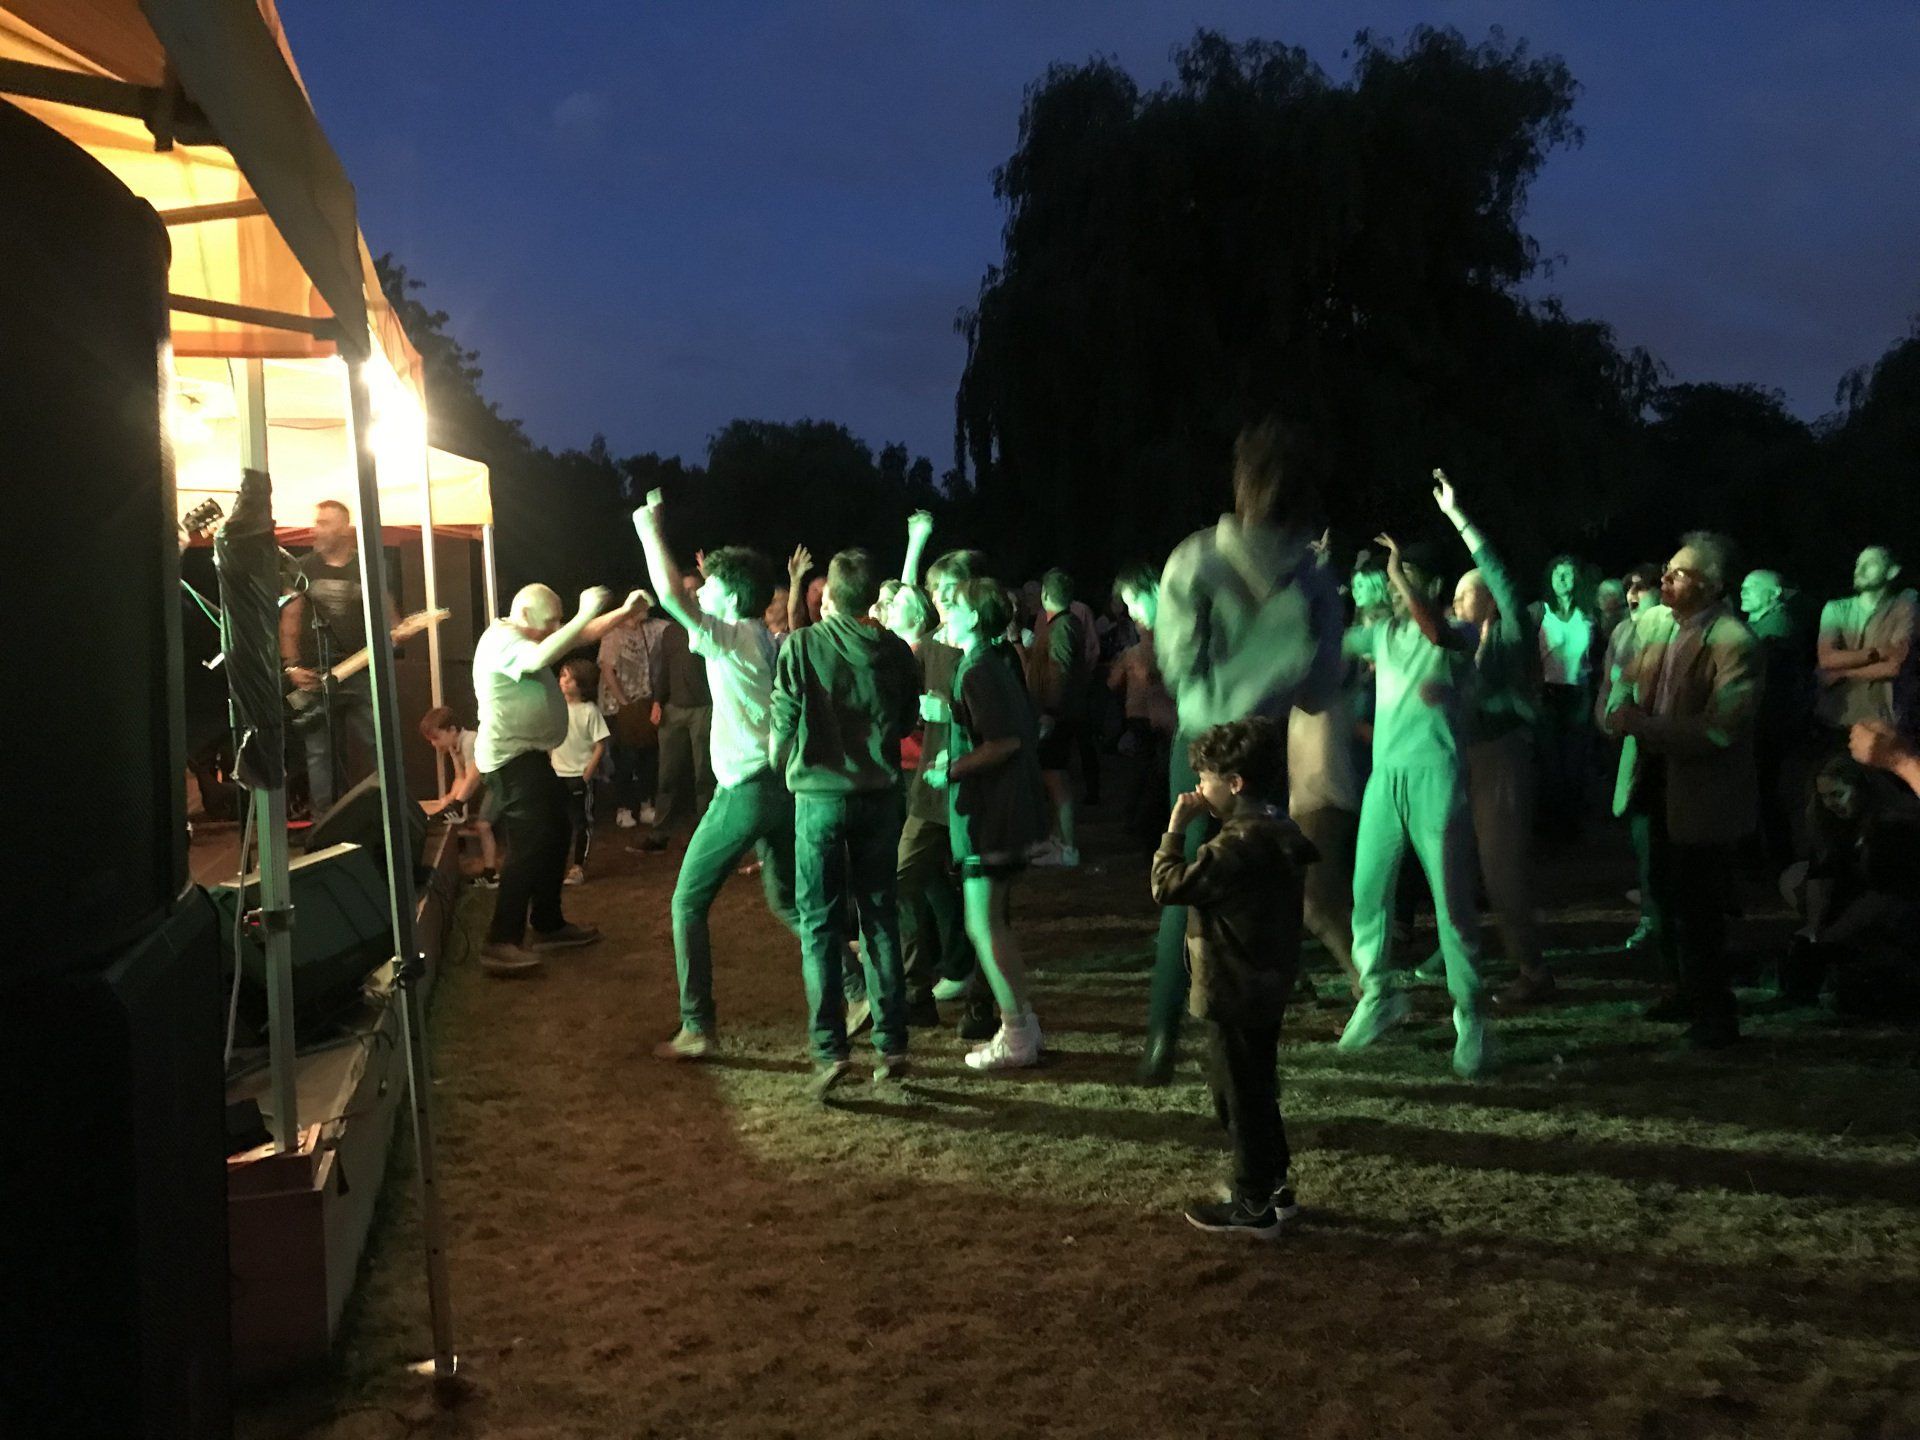 A group of people are dancing in a park at night.